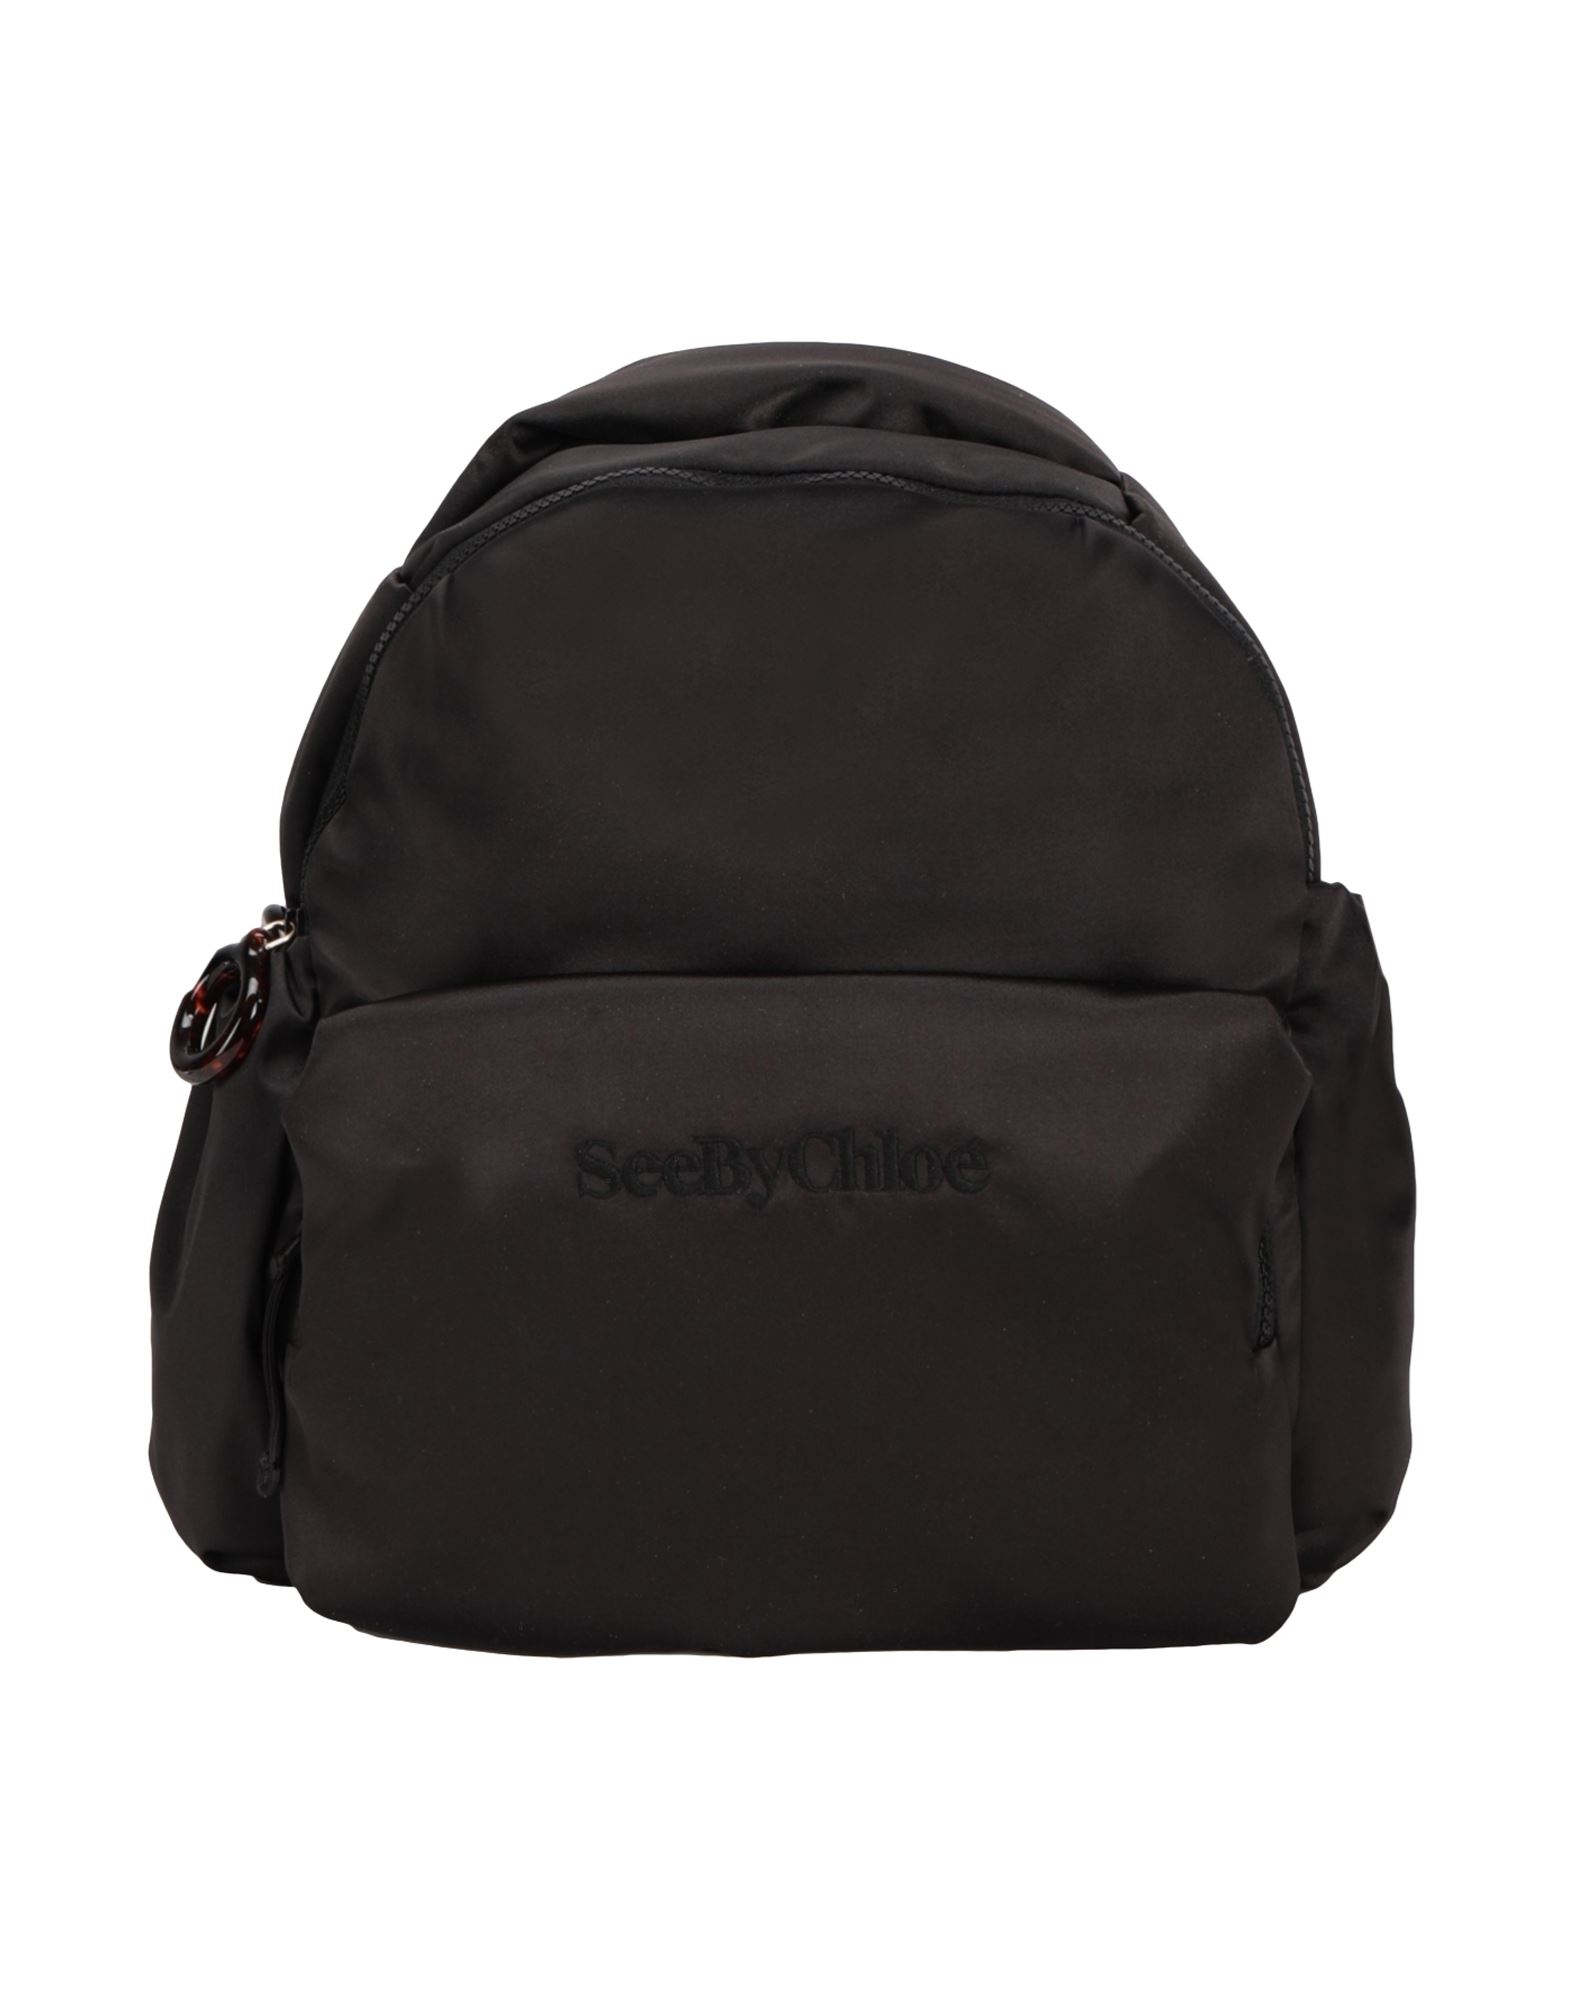 Black Fabric Backpack With String Details